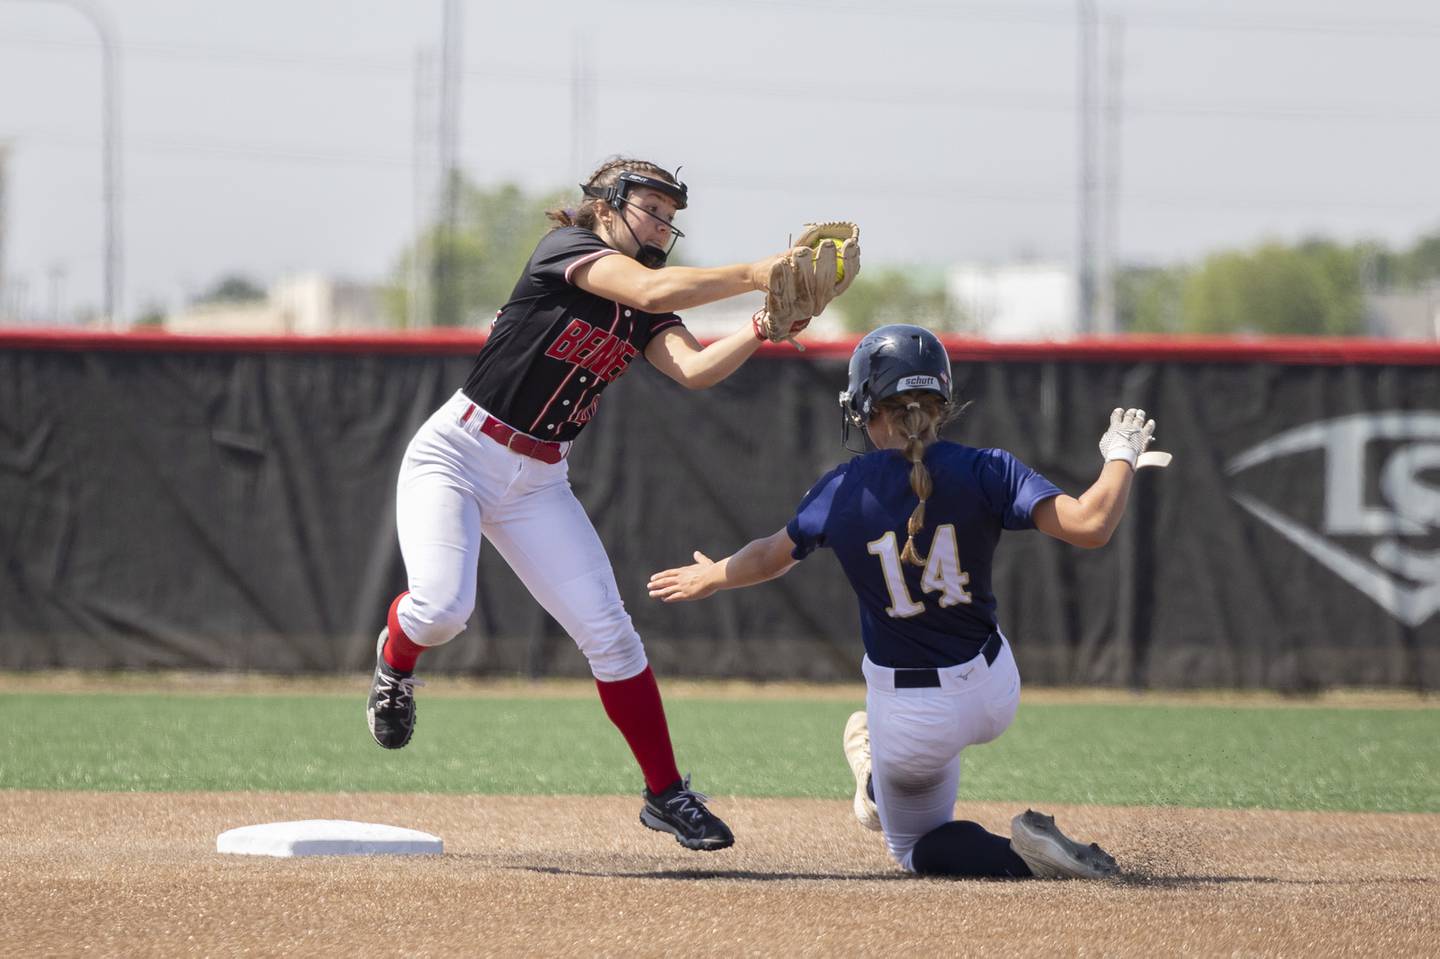 Benet Academy’s Angela Horejs goes to the tag on a steal by Lemont’s Olivia Parent Friday, June 9, 2023 in the class 3A state softball semifinal.